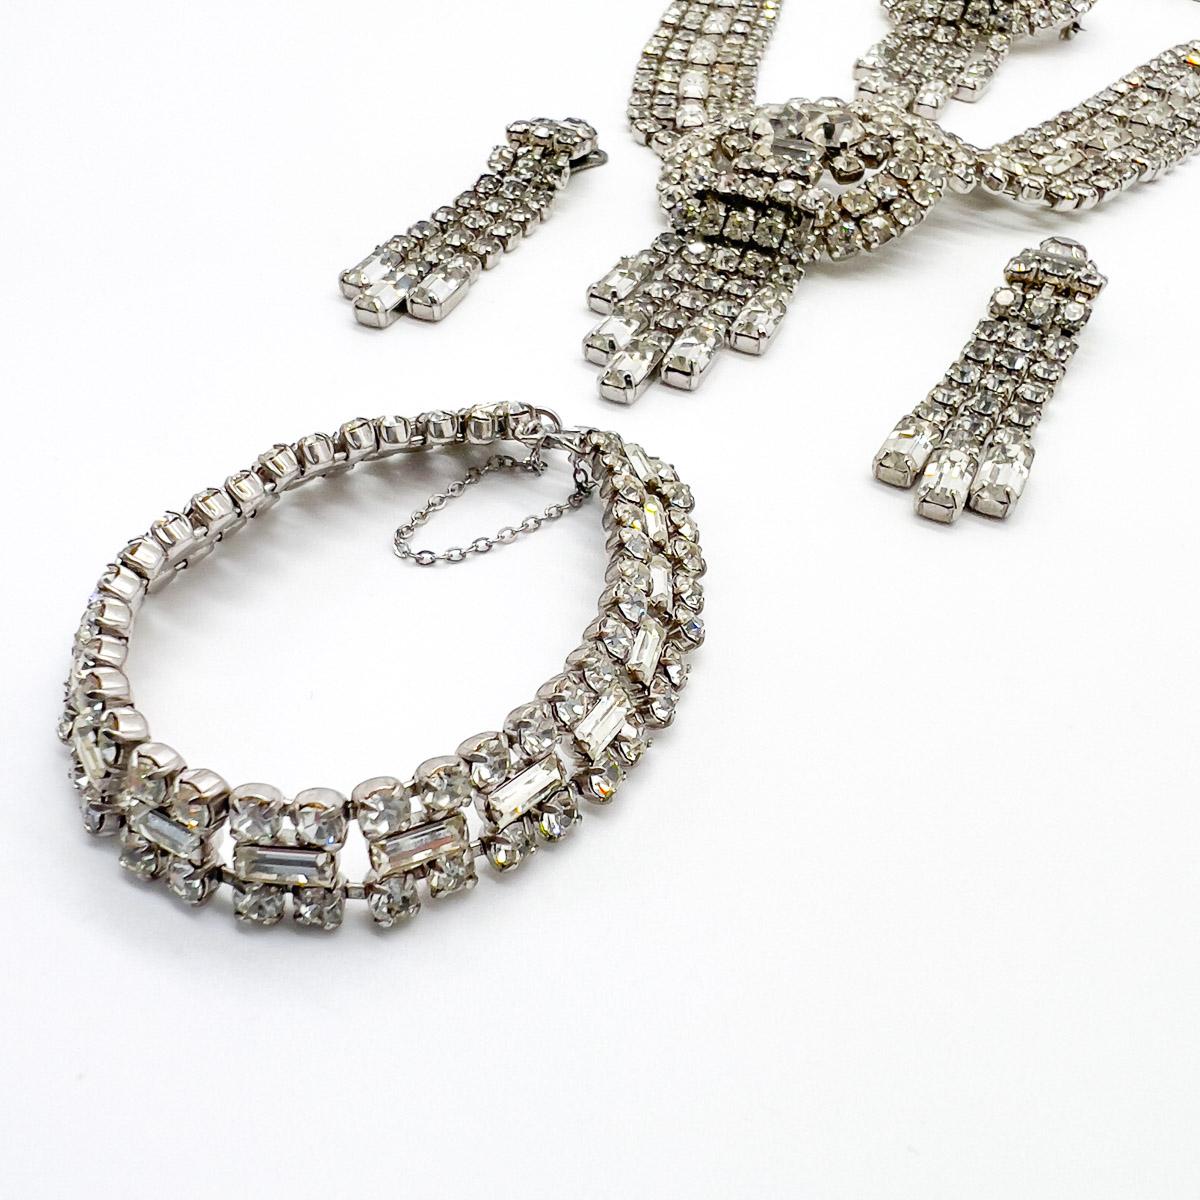 A fabulous and very grand vintage crystal tassel parure from the 1950s. Comprising a full compliment of four pieces. Think cocktails, think parties and glamour. The vast array of stones, including fancy cut baguette crystals and chatons in varying